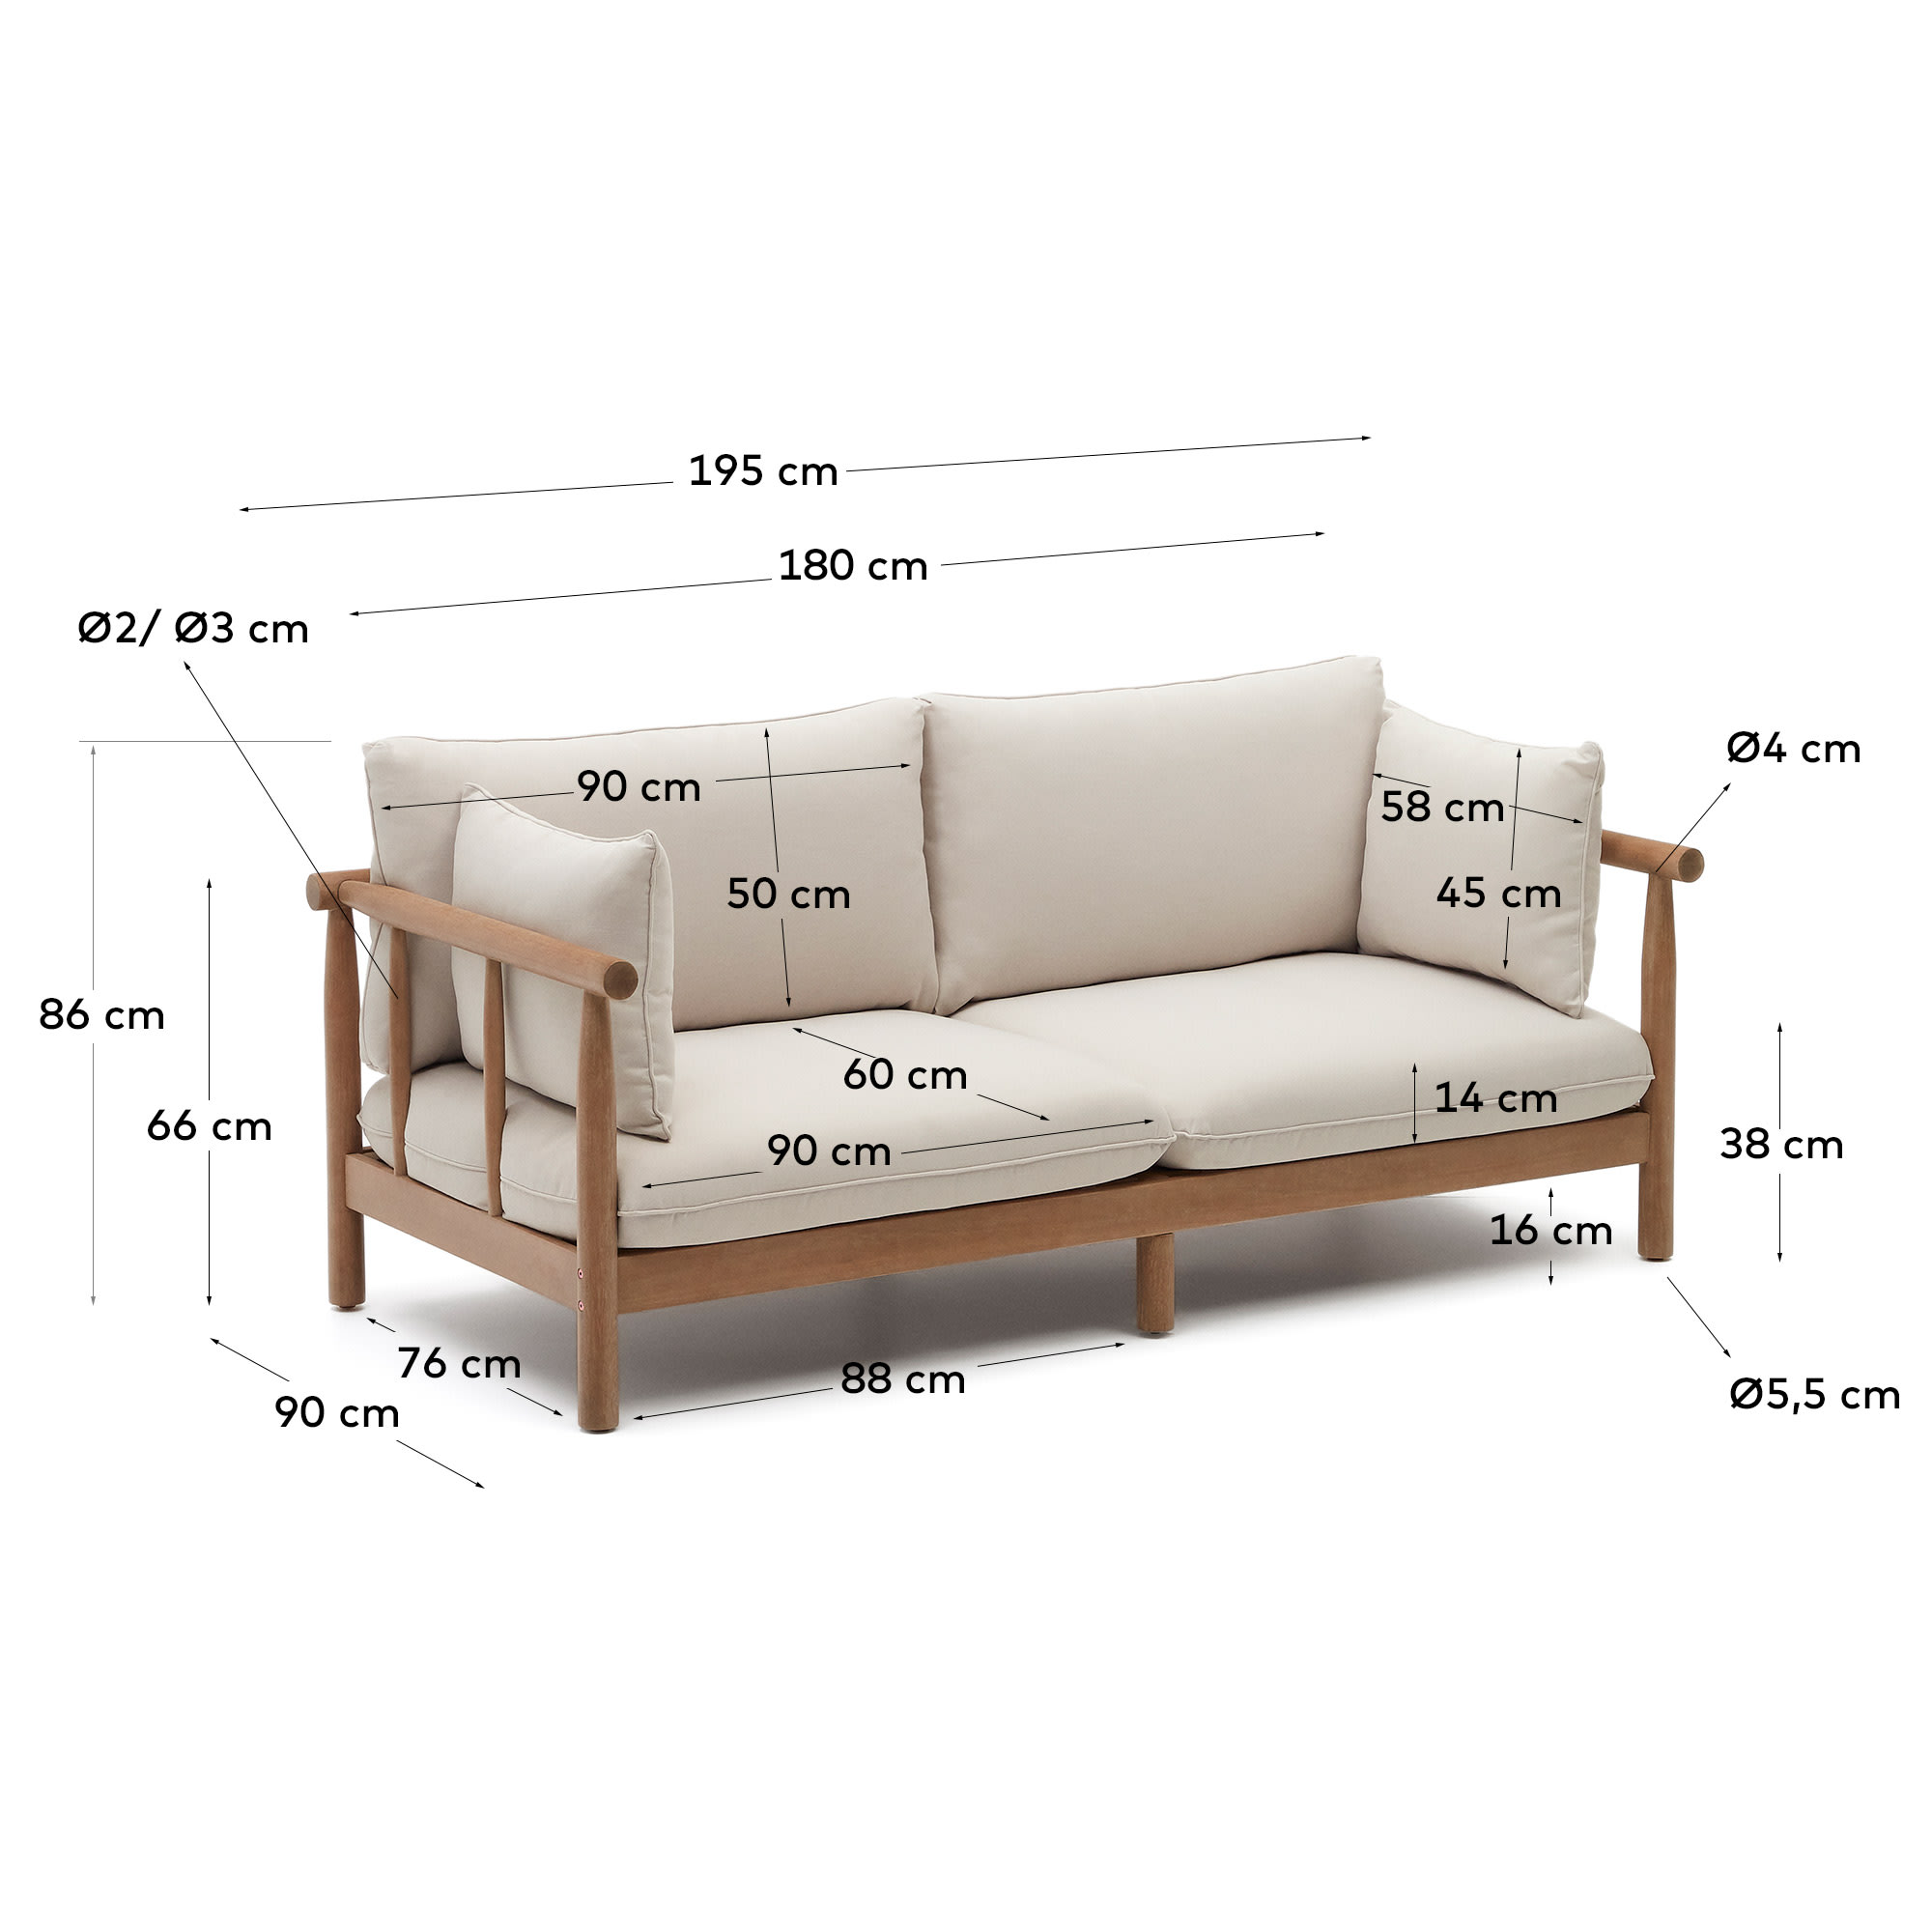 Sacova 2 seater sofa, made from solid eucalyptus wood 195 cm - sizes